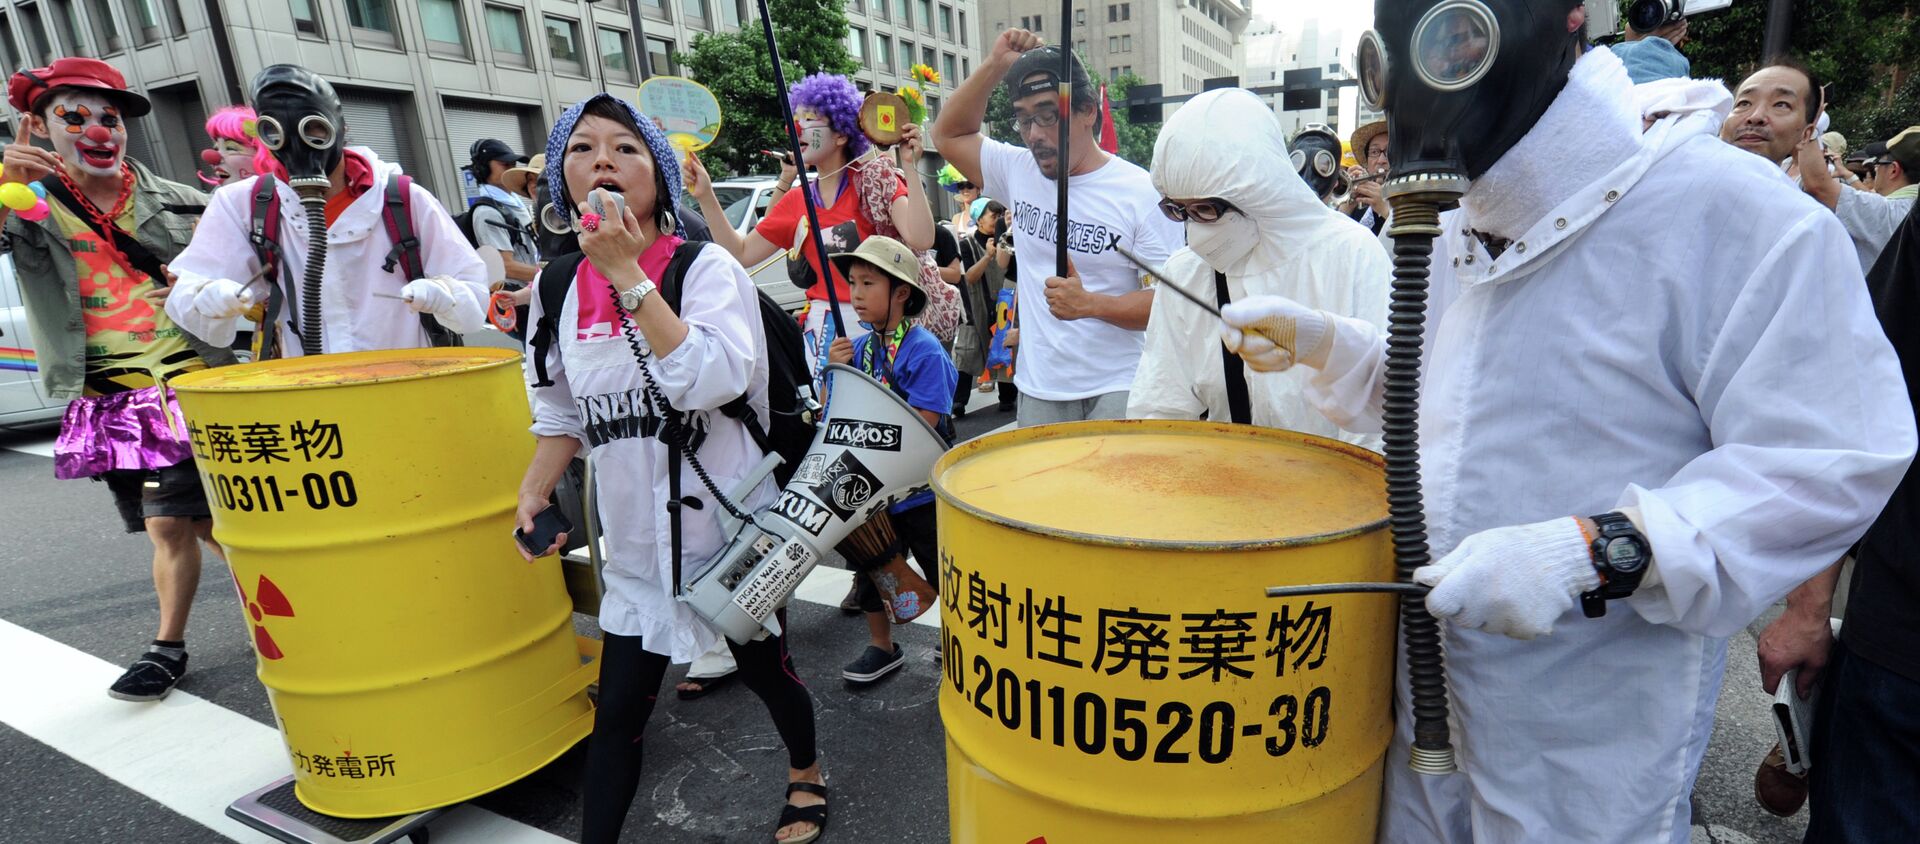 Protesters wearing gas masks and white costumes similar to those of decontamination workers at the crippled Fukushima plant beat drums painted with radioactive waste symbols during an anti nuclear power demonstration march in Tokyo on July 29, 2012 - Sputnik International, 1920, 07.06.2017